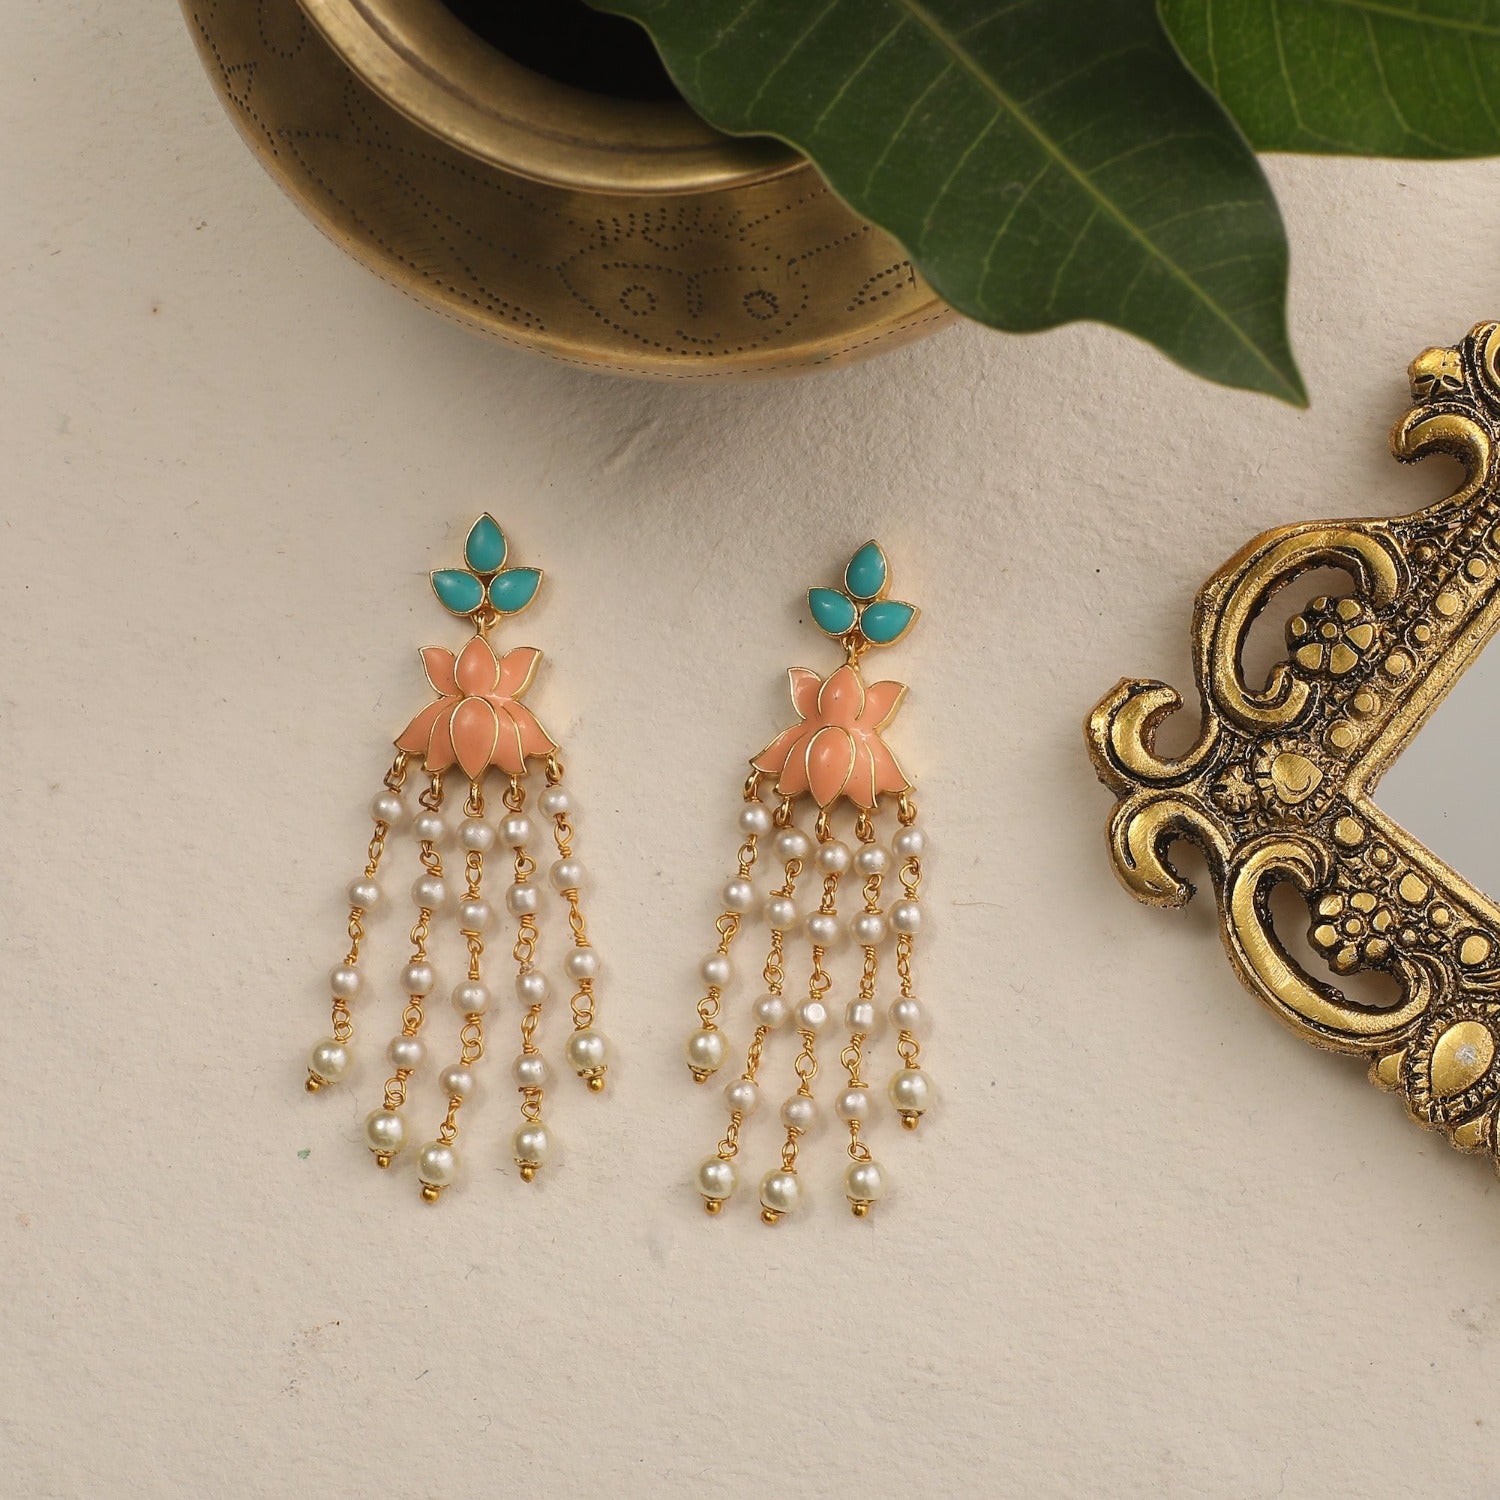 7 Trending Jewellery Designs to Accessorize your Western Outfits